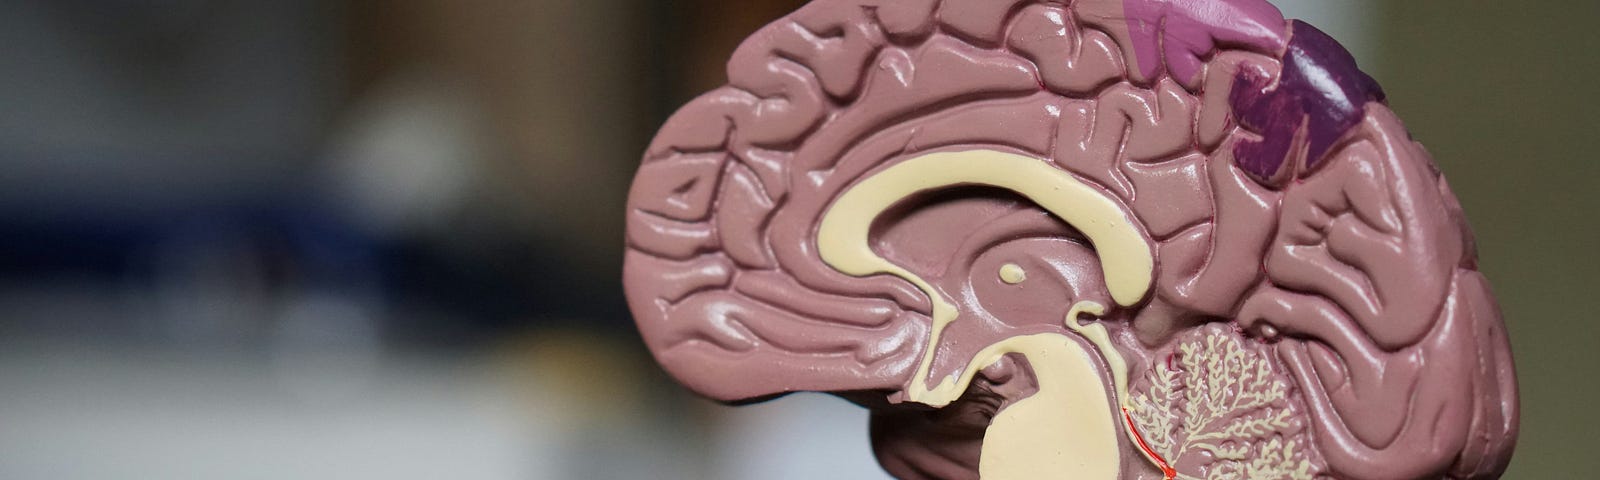 Model of a brain in pink and cream colors